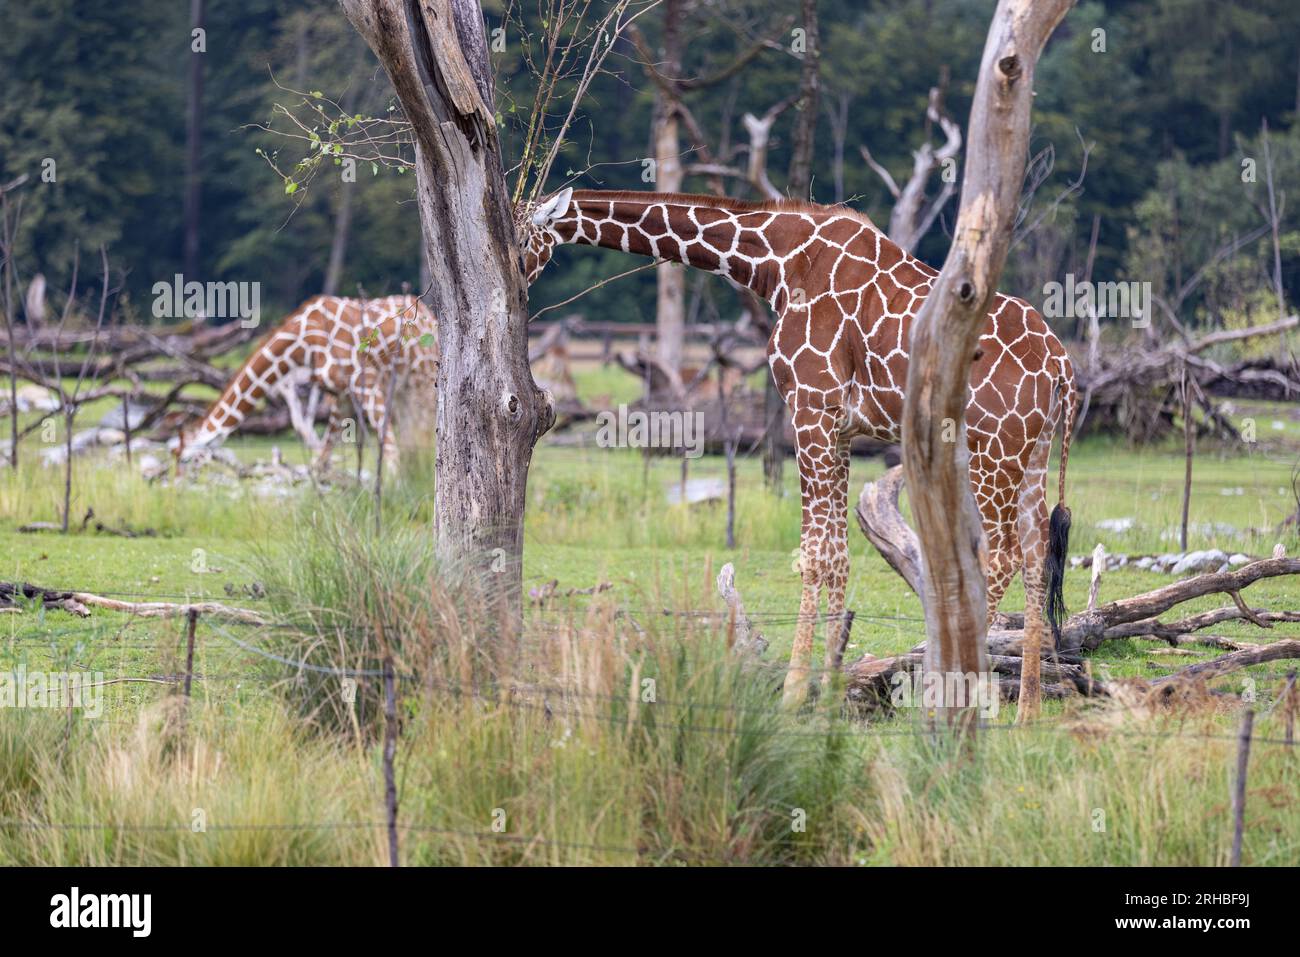 Amazing giant giraffe is take a meal in the tree. Wonderful giraffe is walking through the nature. Stock Photo